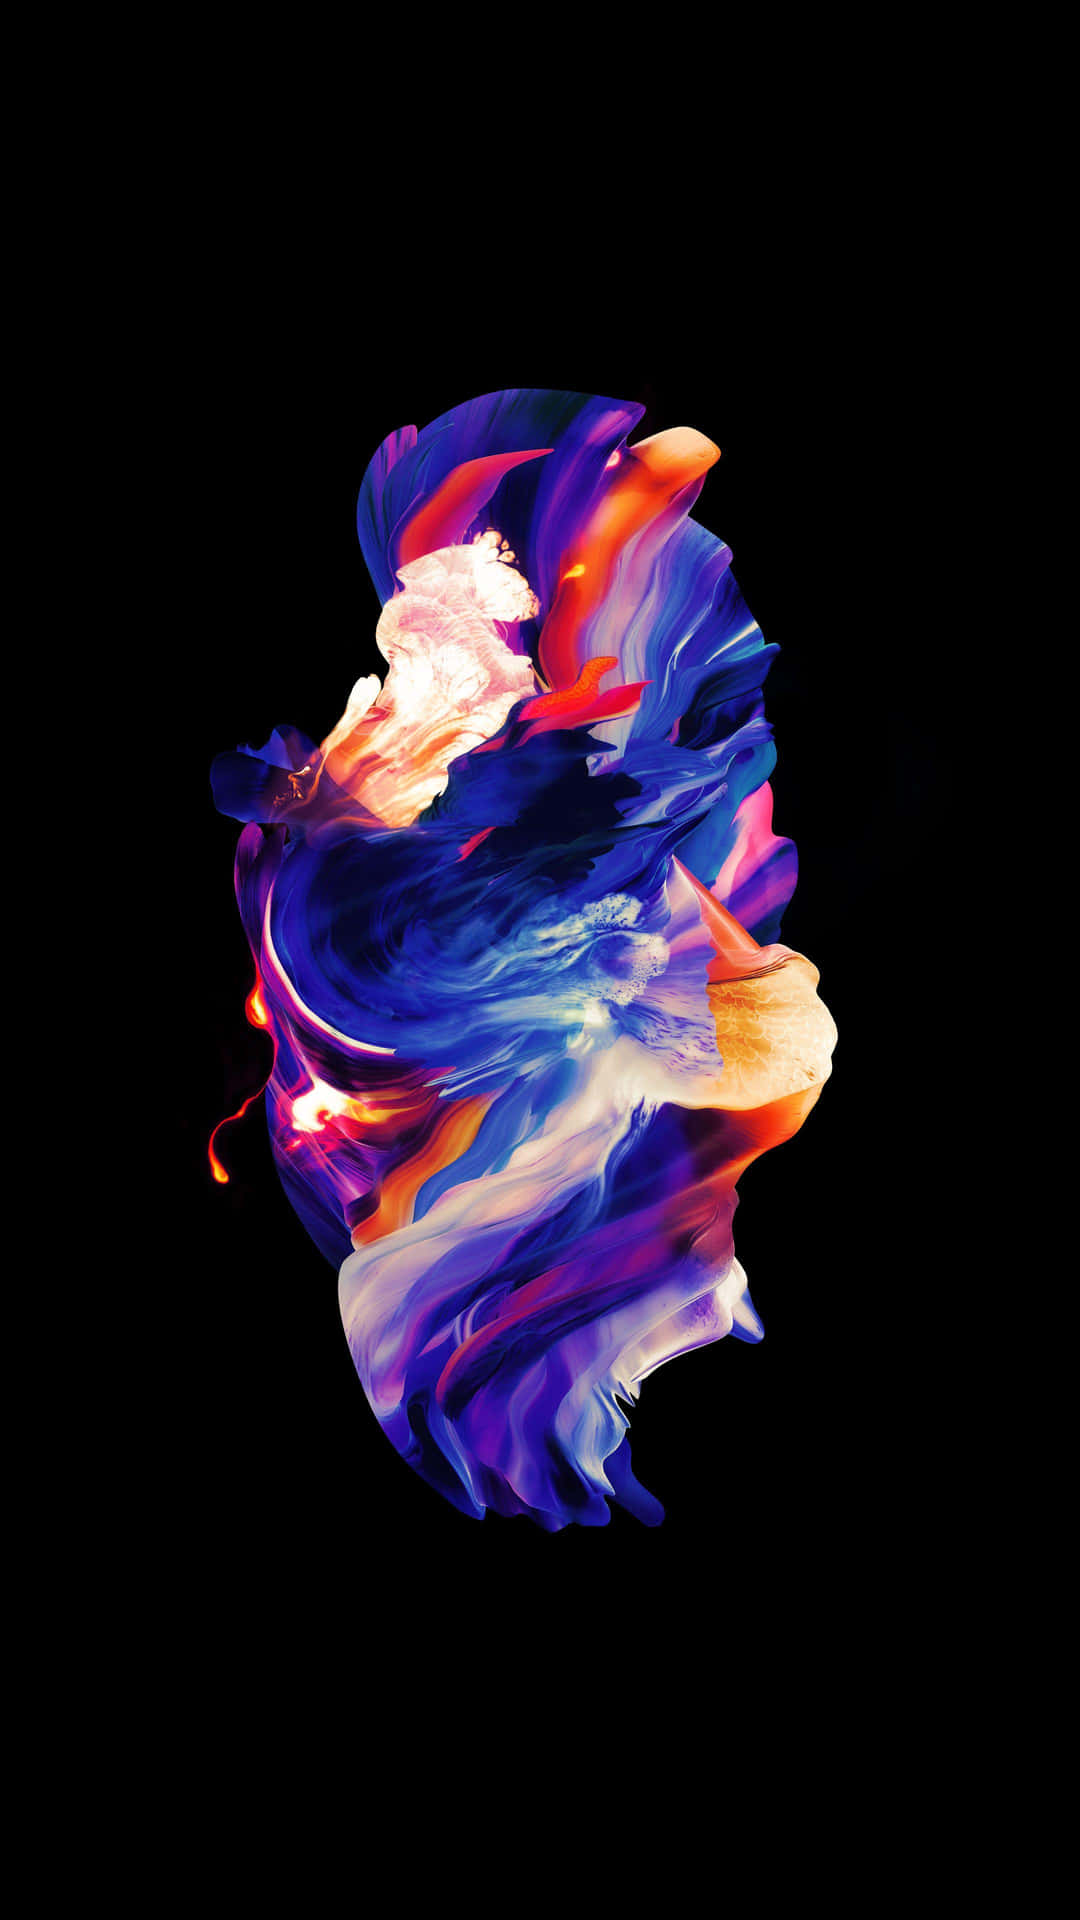 Hd Oled OnePlus Launcher Background